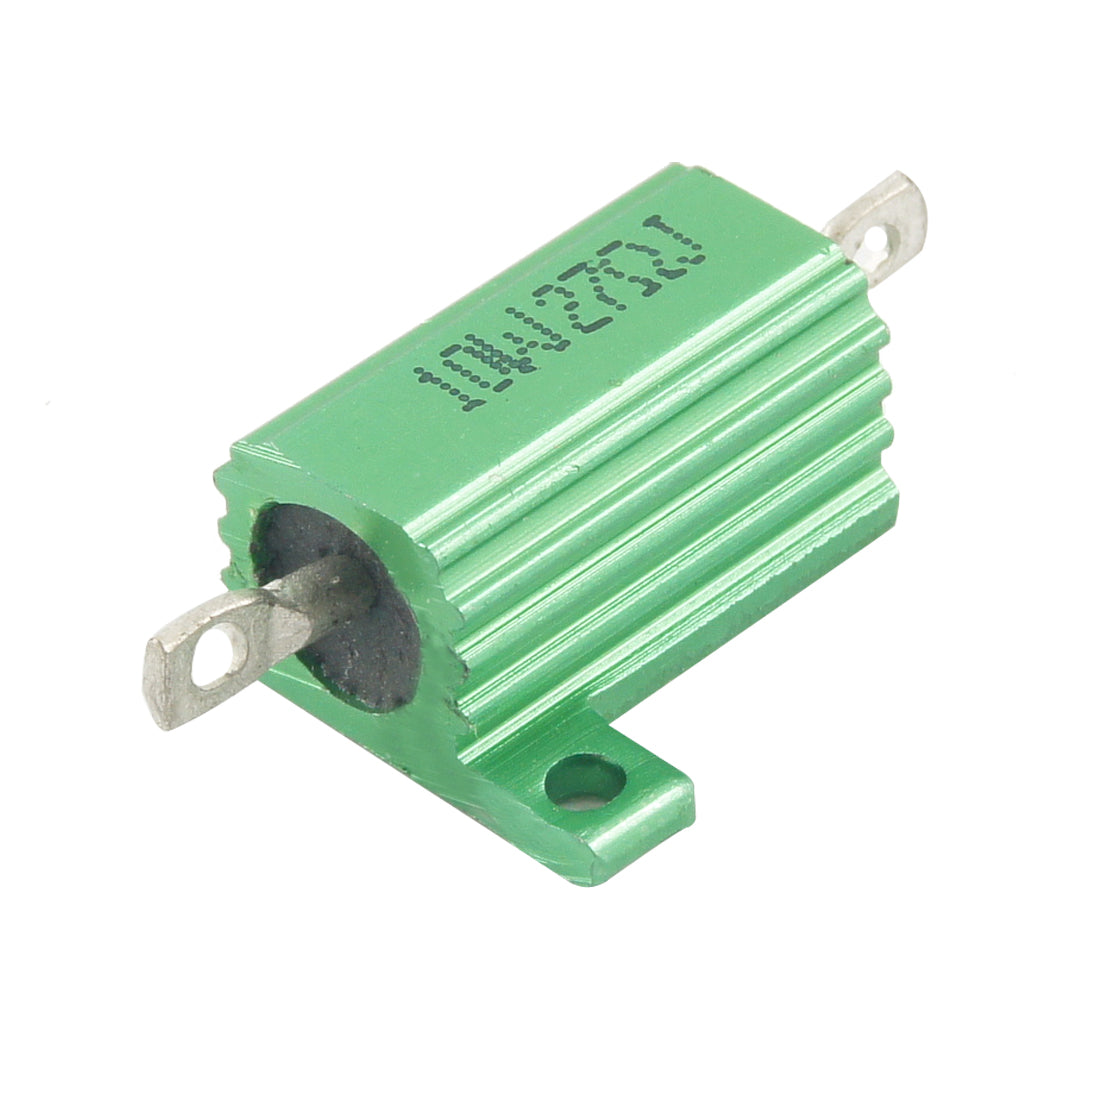 uxcell Uxcell Green 10 Watt 27 Ohm 5% Aluminum Shell Case Wire Wound Resistor